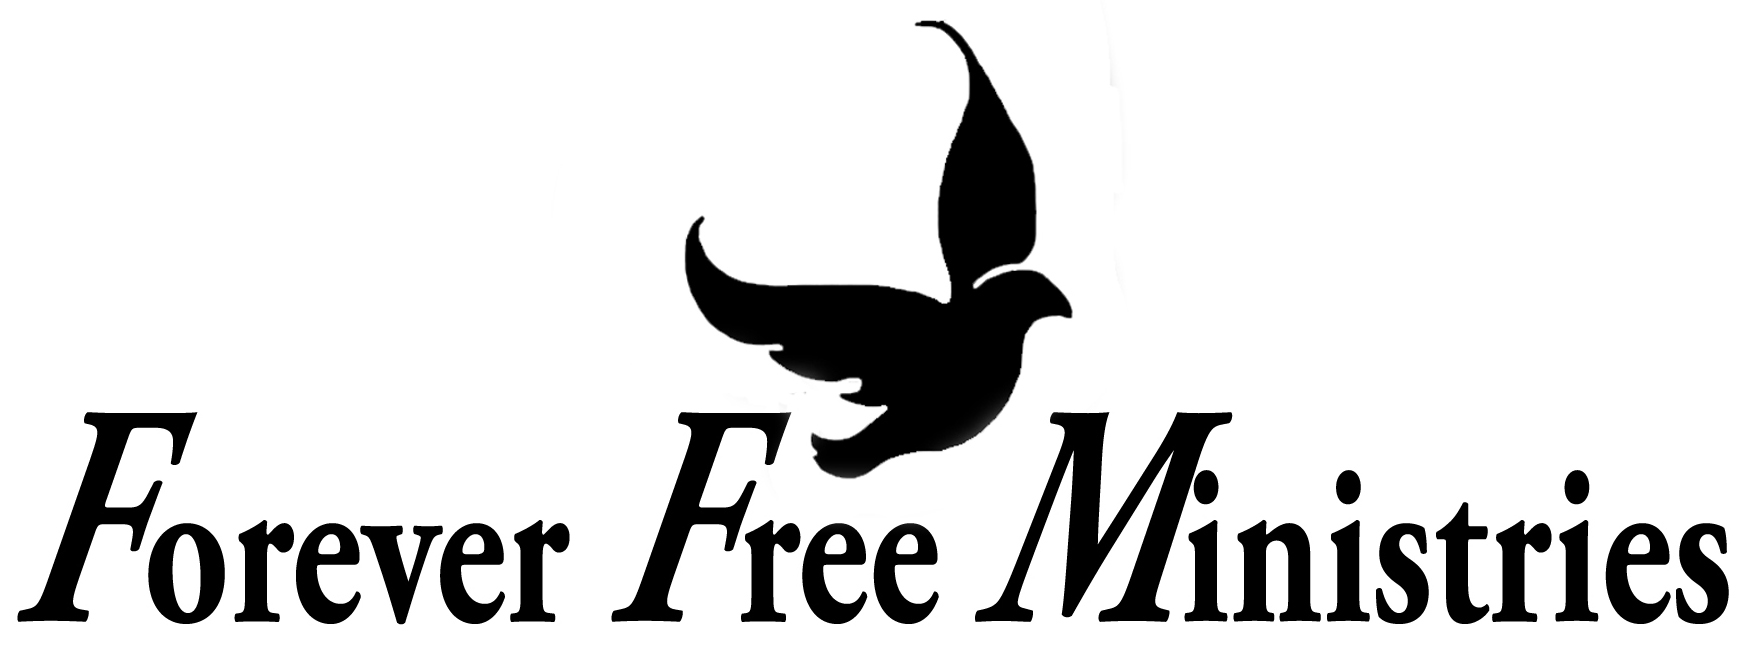 Forever Free Ministries